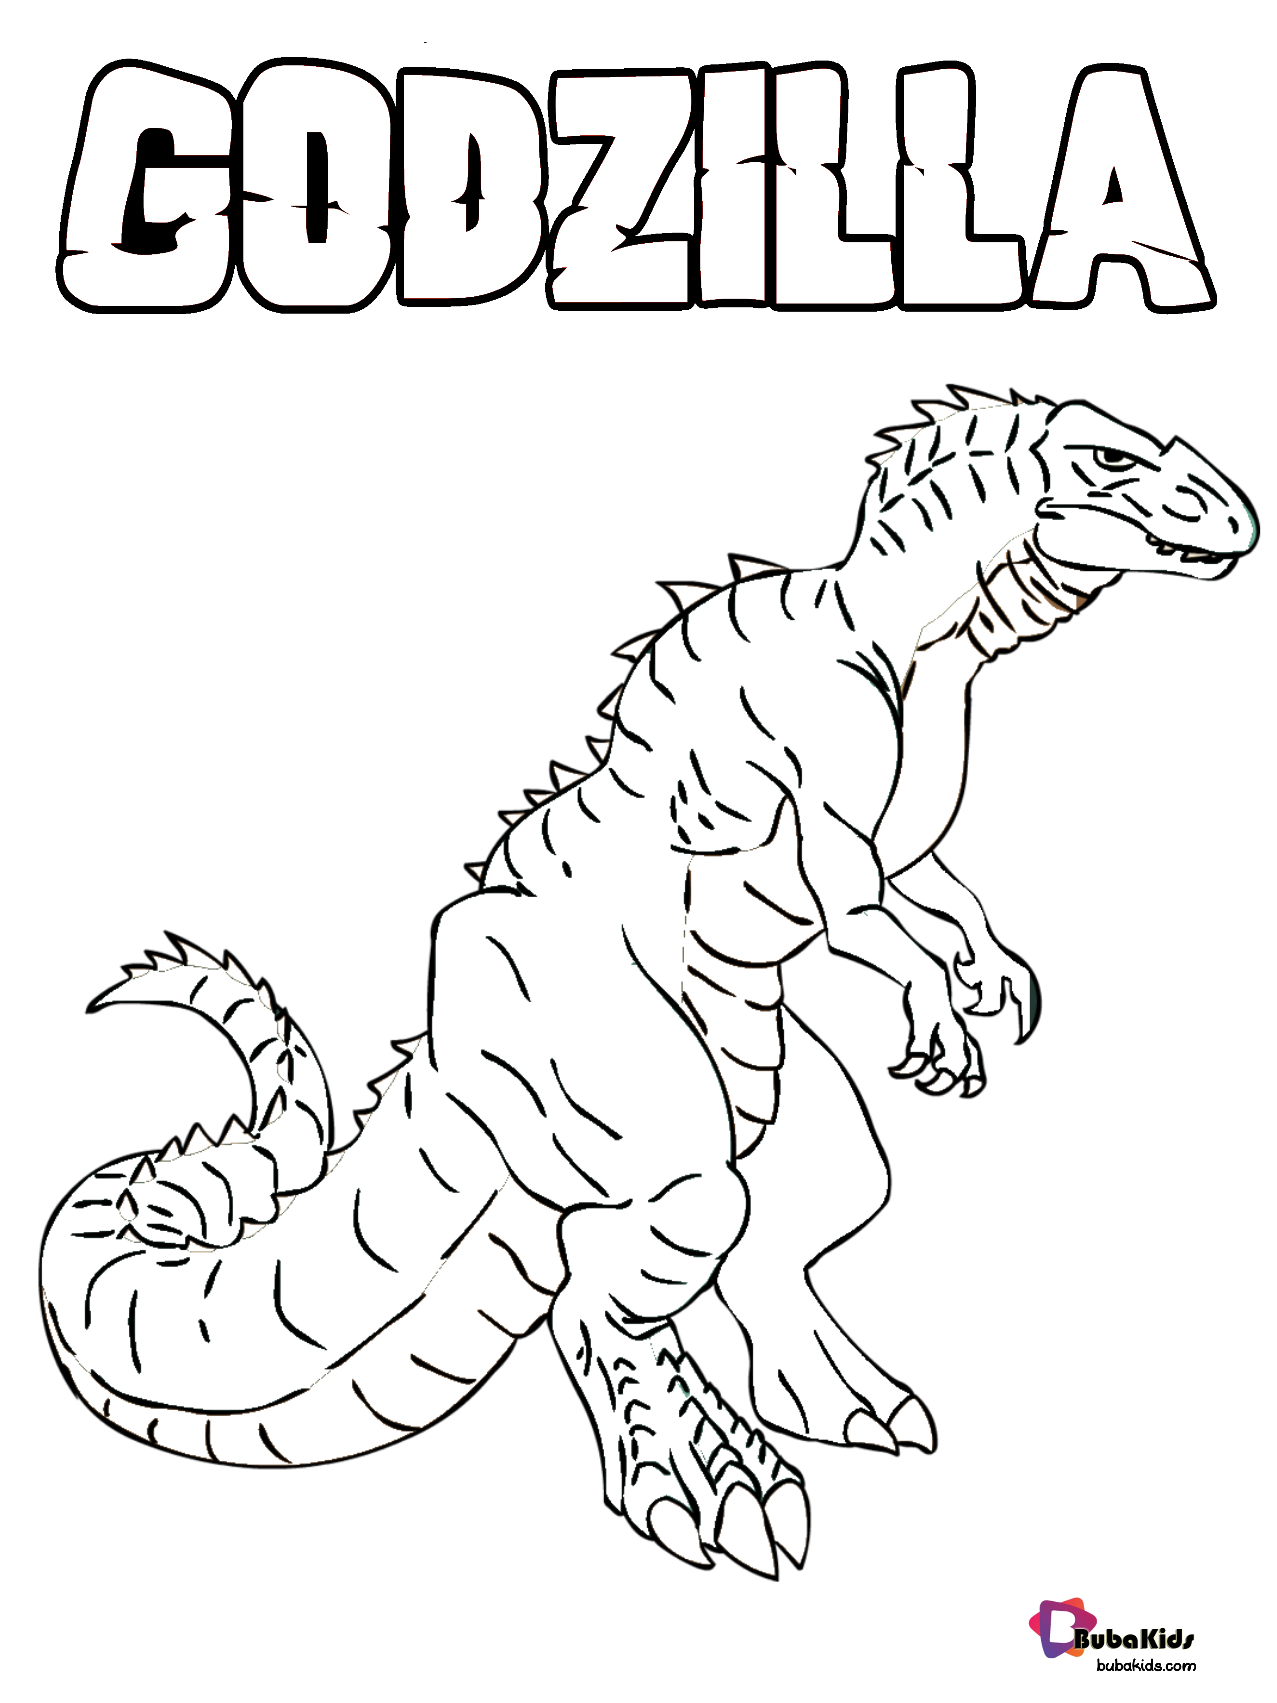 Godzilla King of the Monsters coloring page.